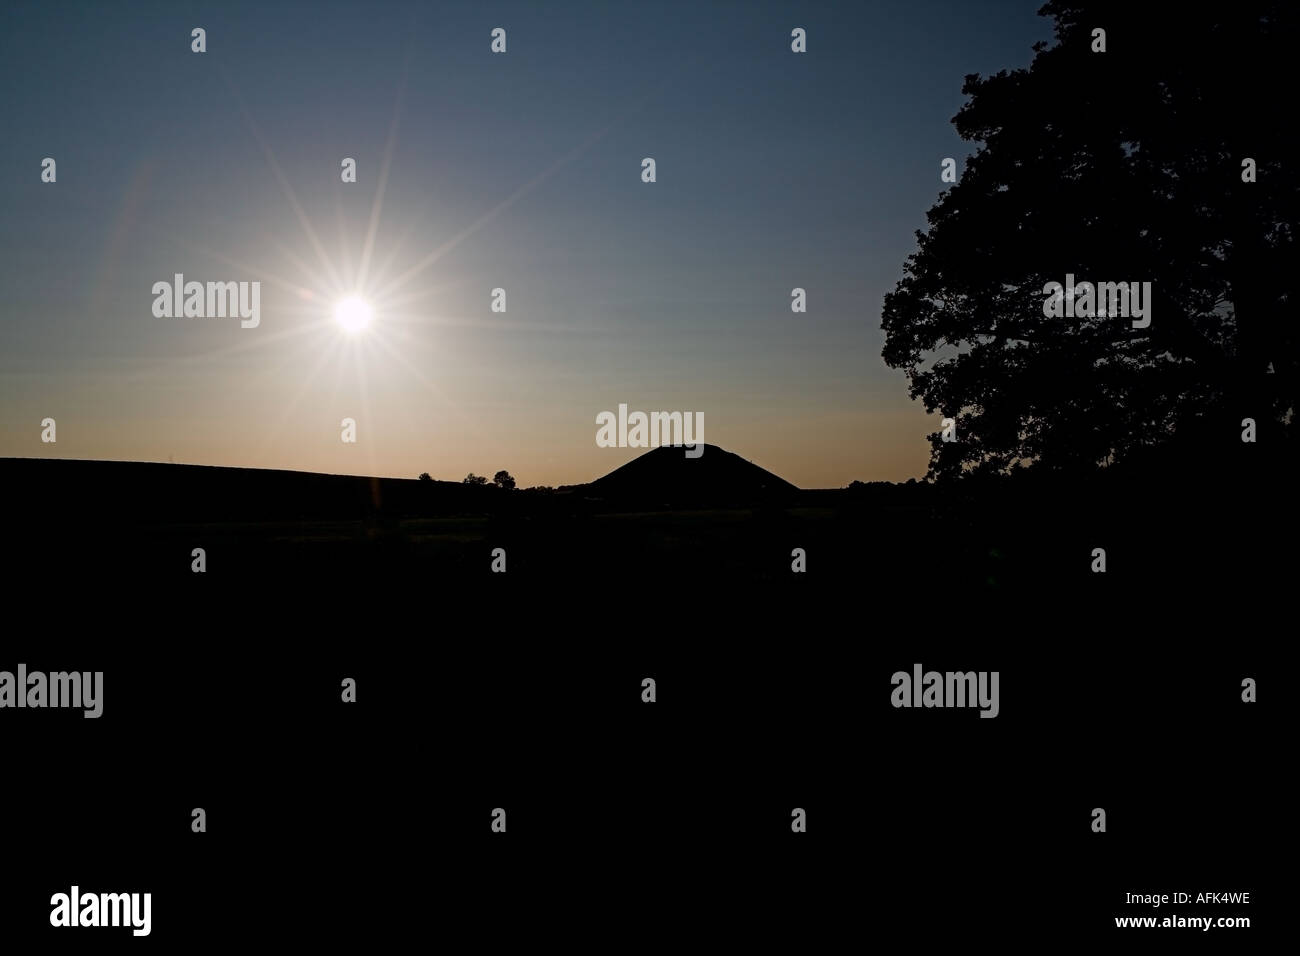 Silhouetted Silbury Hill Prehistoric Earth Mound against sunburst. Wiltshire, England, UK. Stock Photo